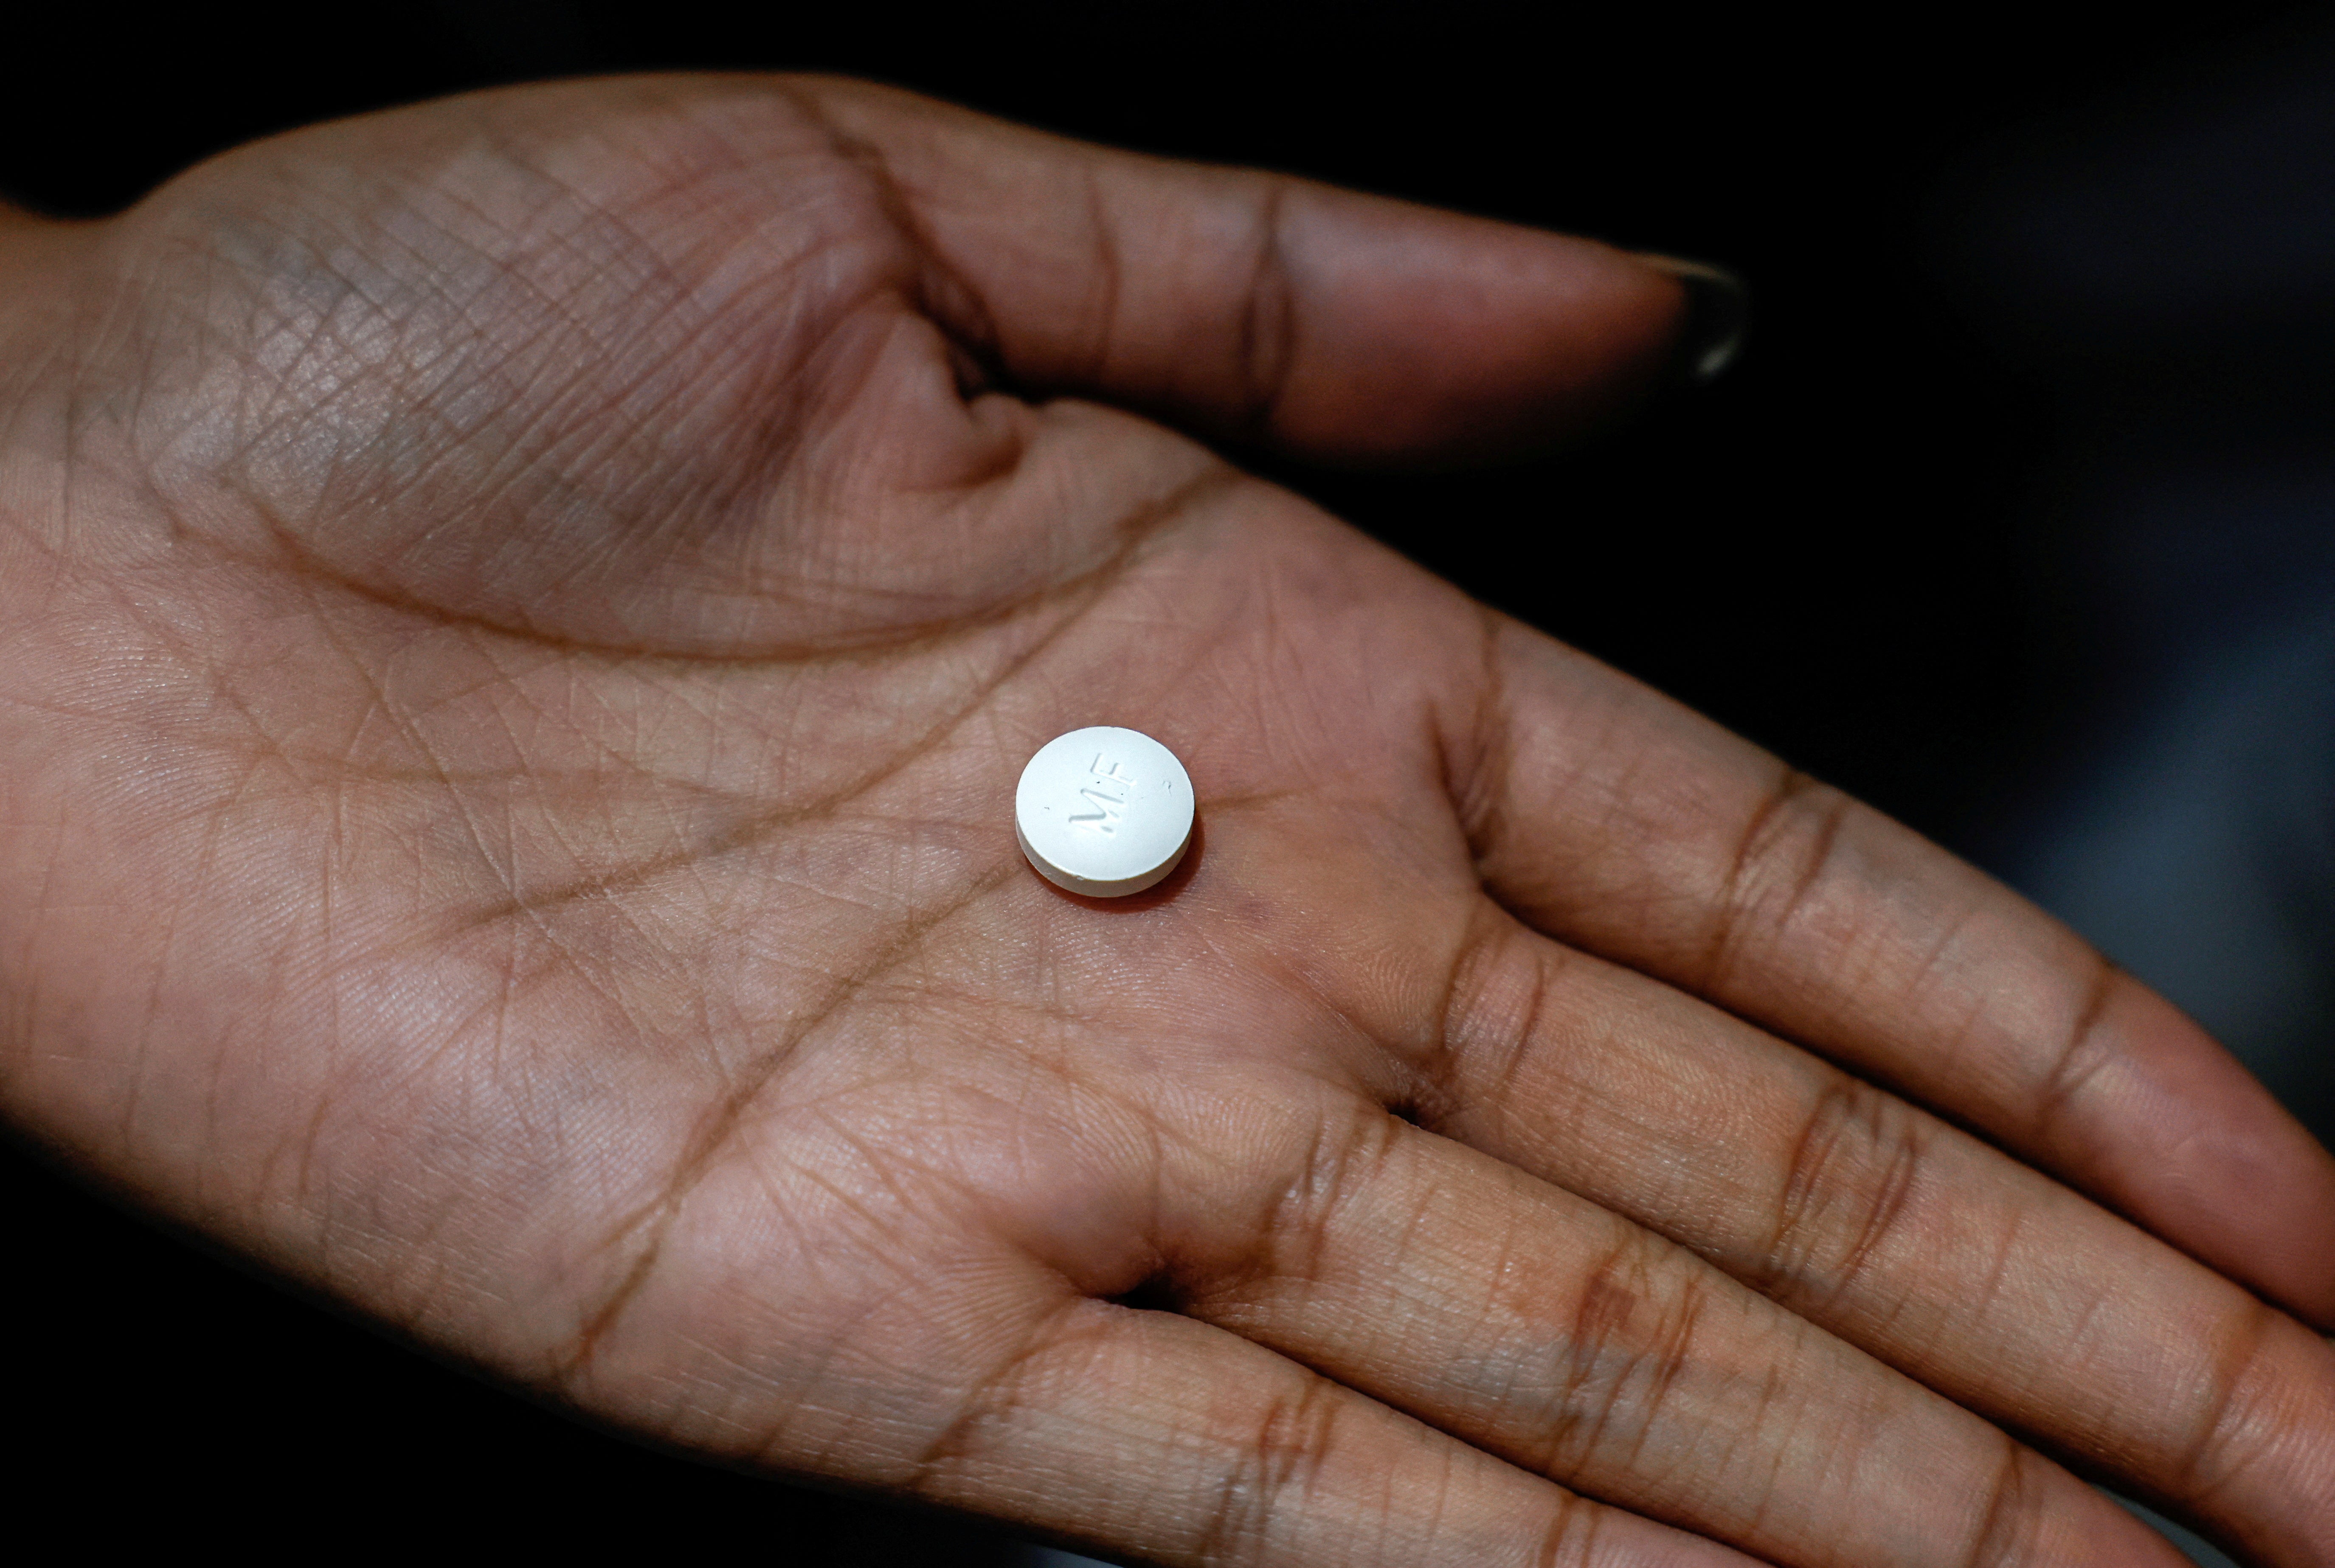 A patient holds a mifepristone pill, one of two drugs in a two-drug regimen for a medication abortion, the most common form of abortion care in the US